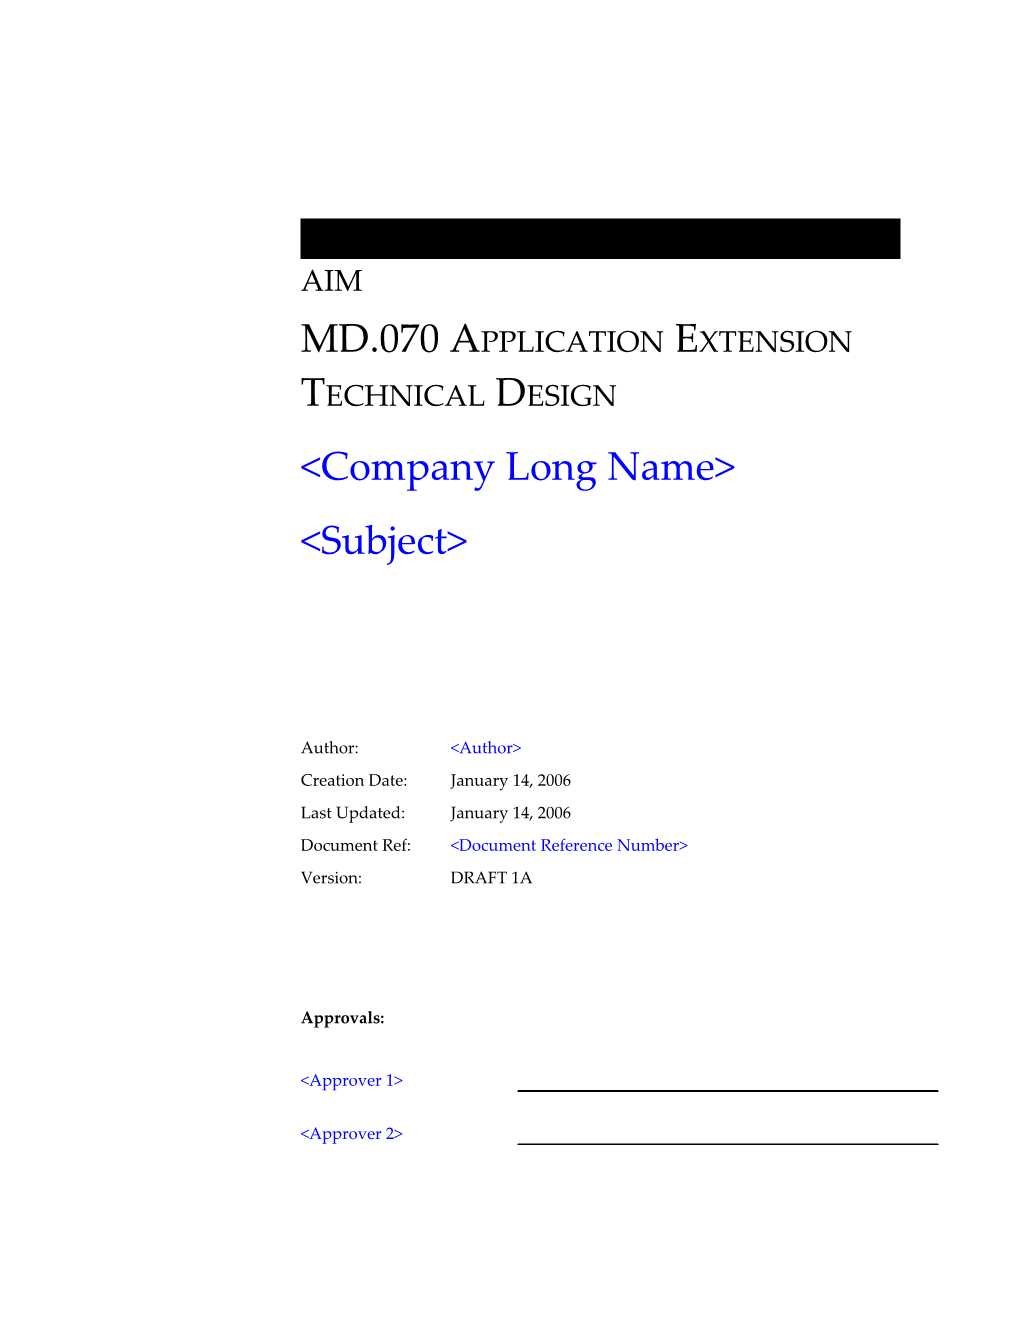 MD.070 Application Extension Technical Design